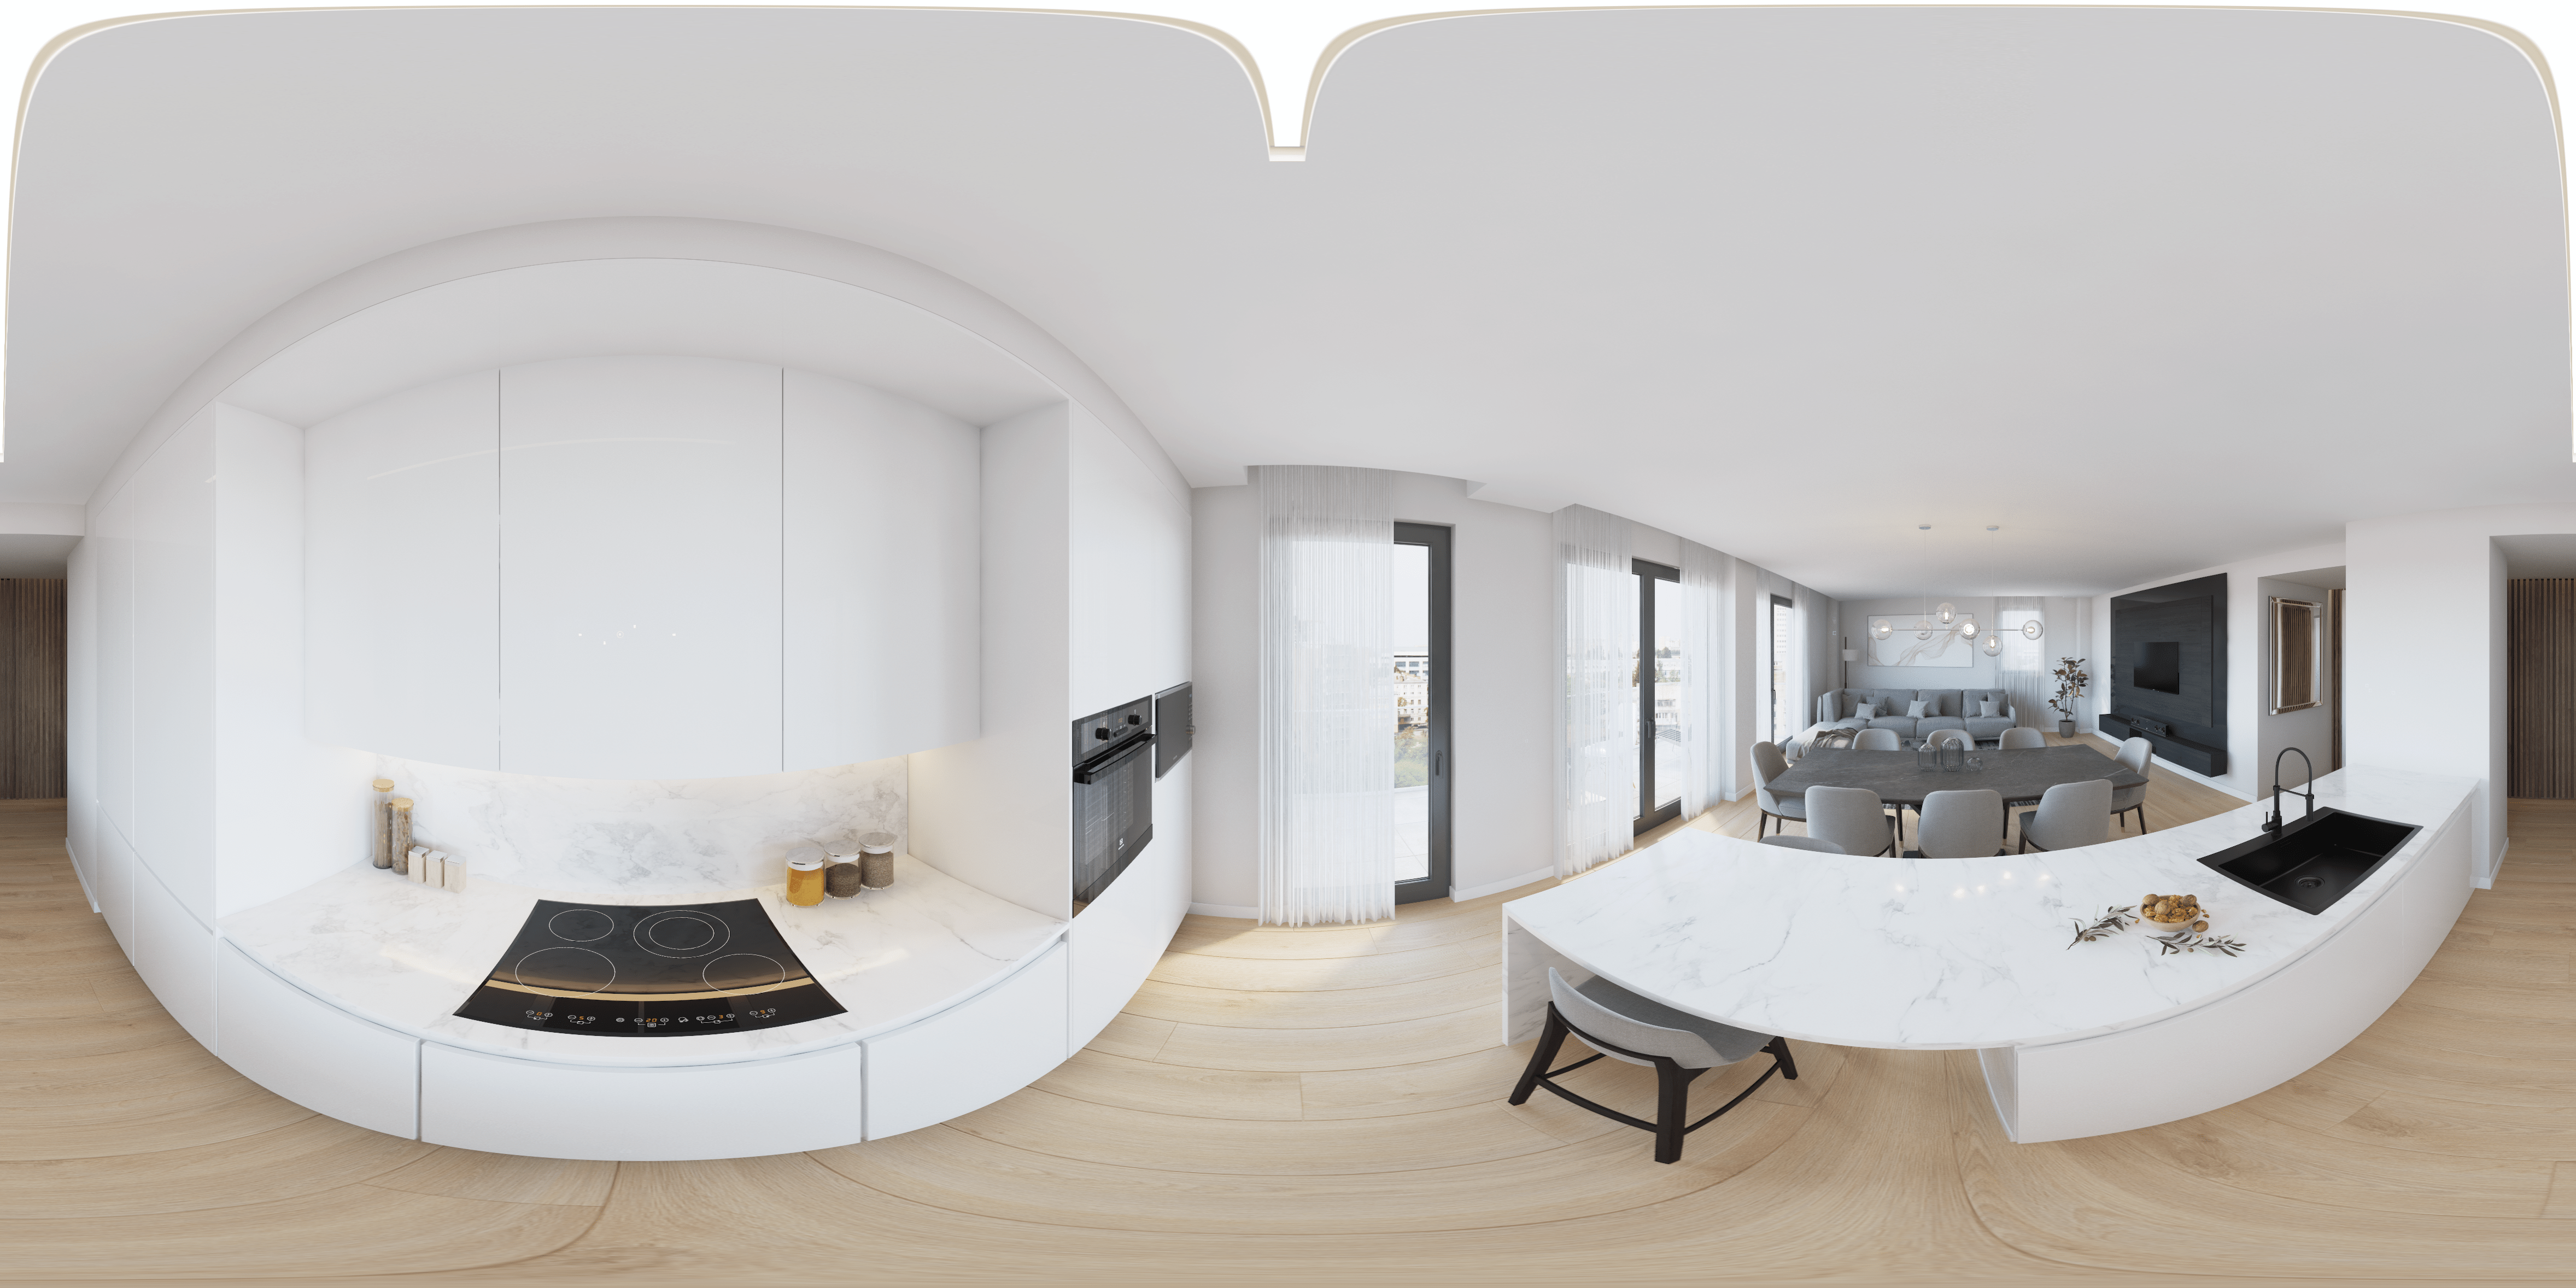 Architecture rendering for real estate company in new york with wolf kitchen, marble countertop, views of central park for only 300$